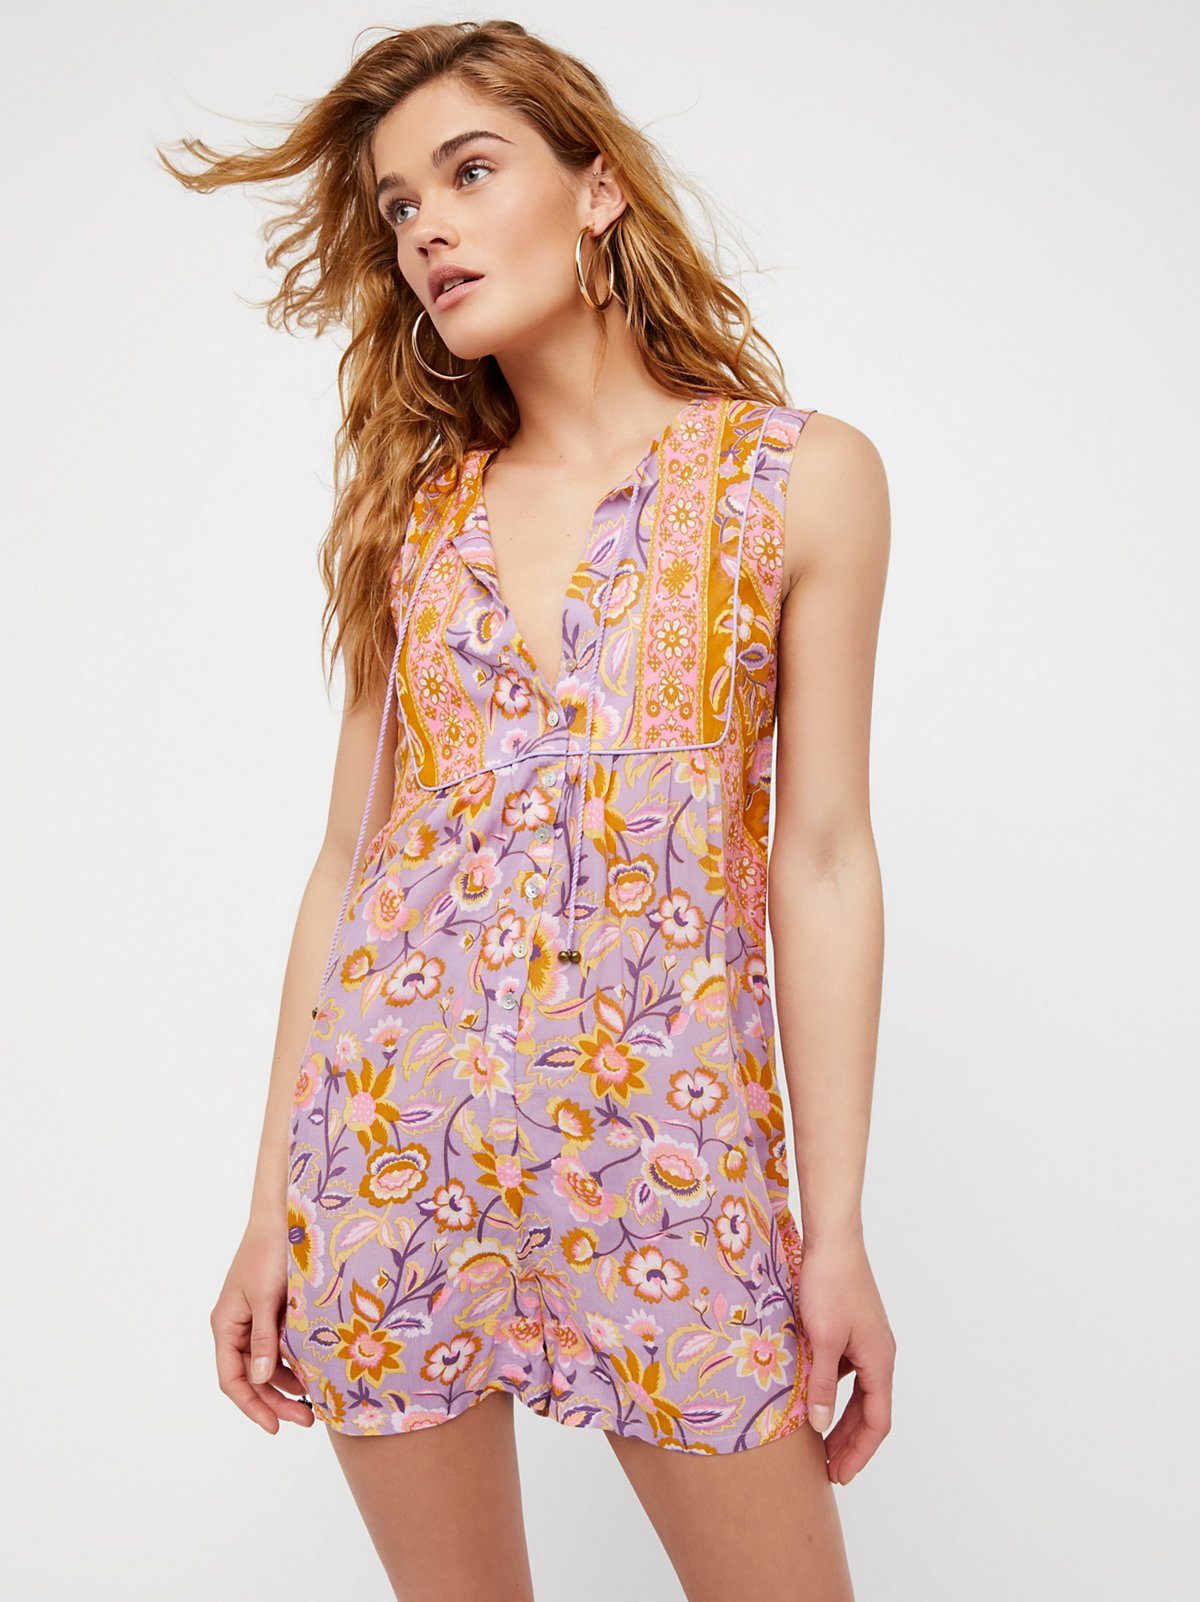 Spell & the Gypsy Collective Lolita Romper at Free People Clothing Boutique